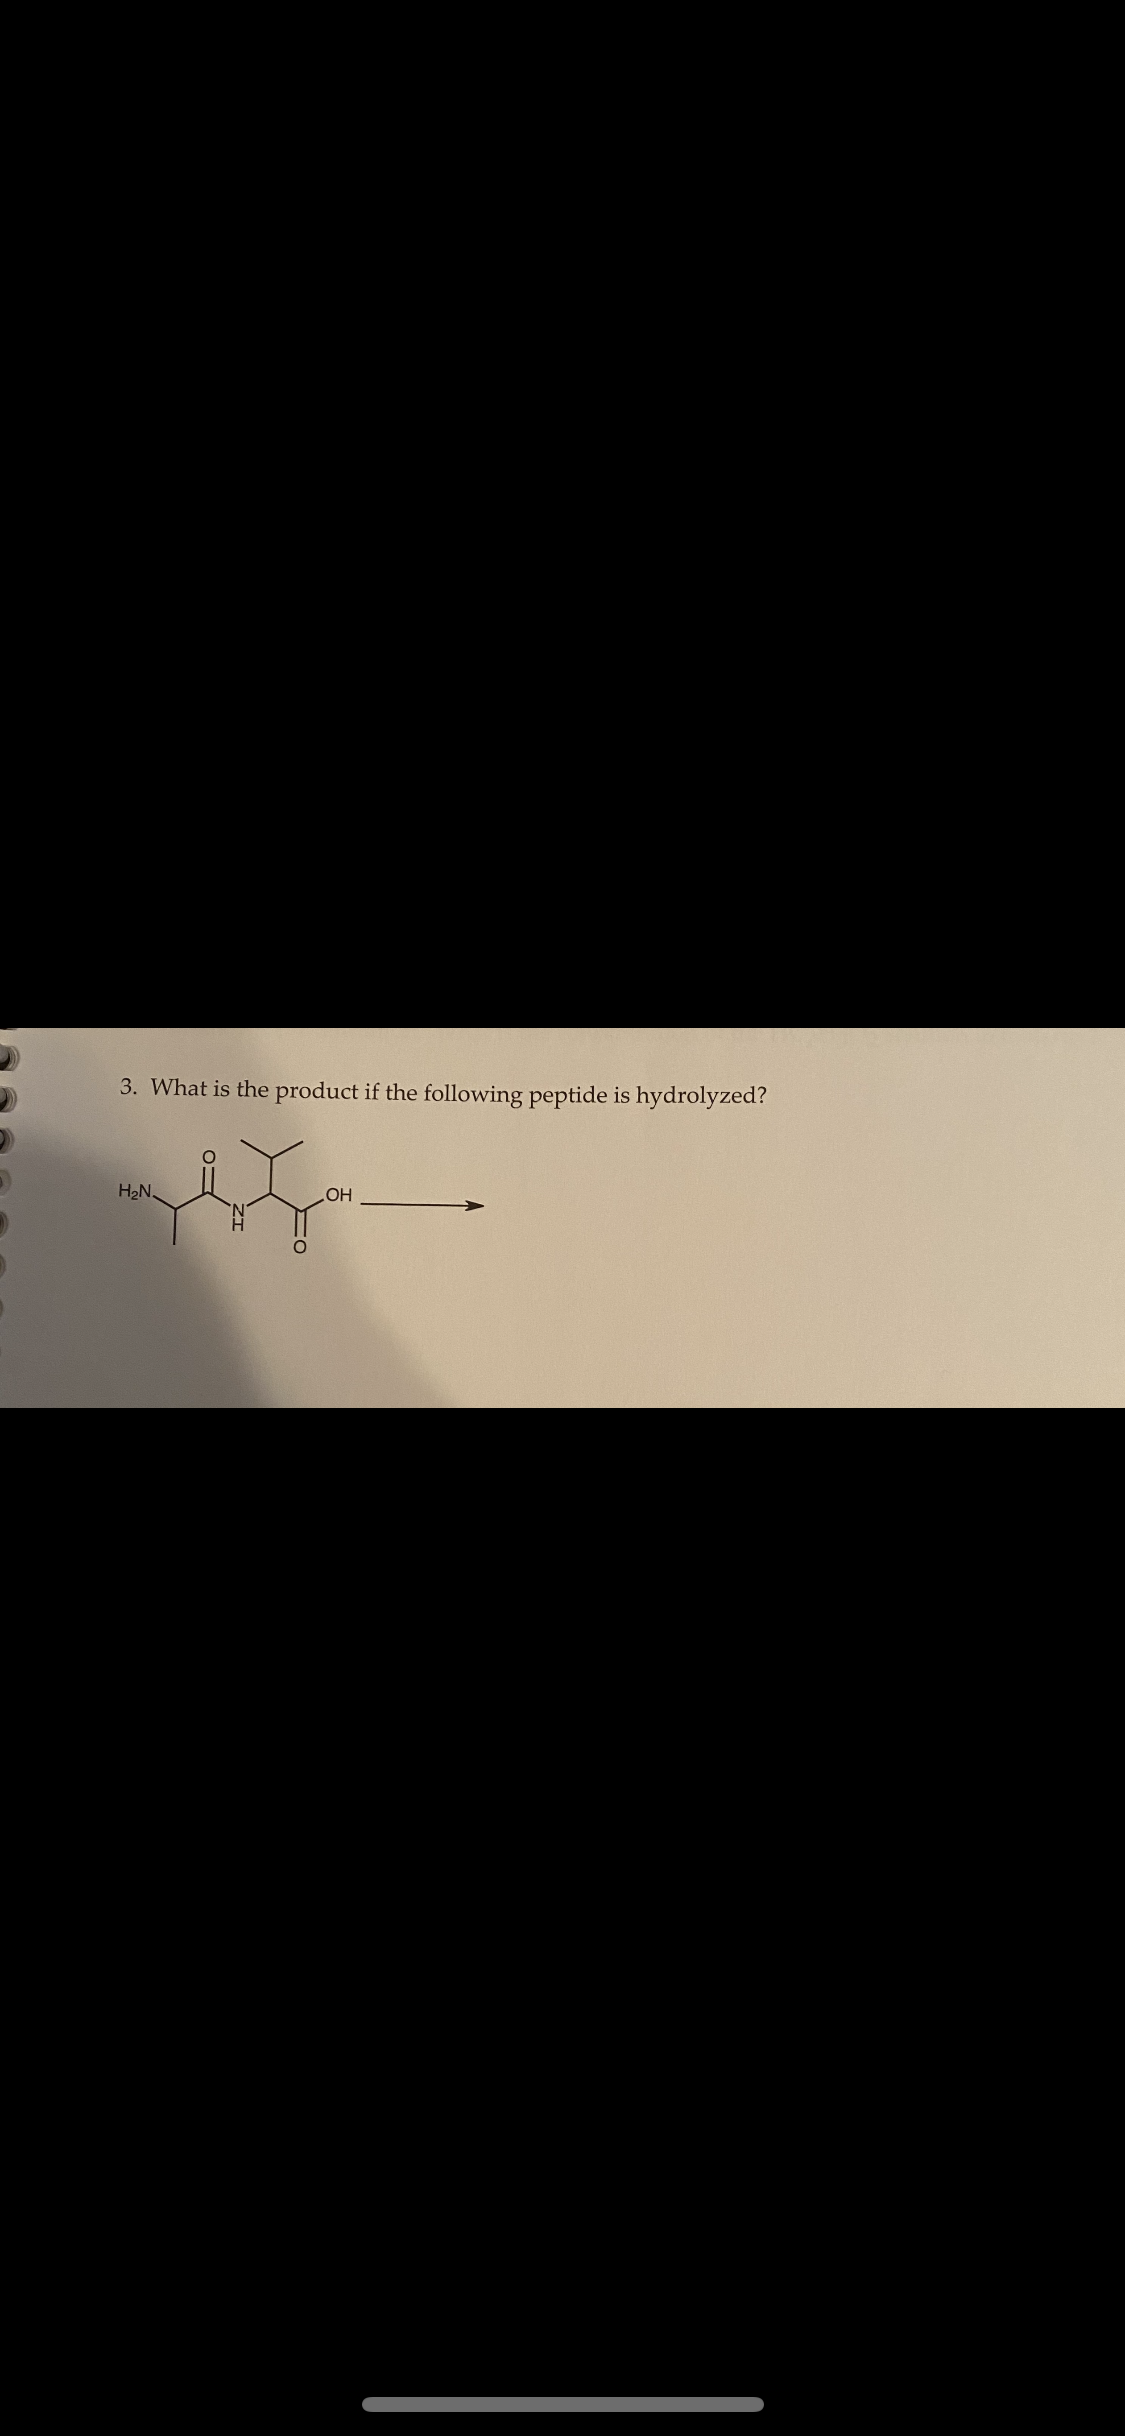 3. What is the product if the following peptide is hydrolyzed?
H₂N
O
OH